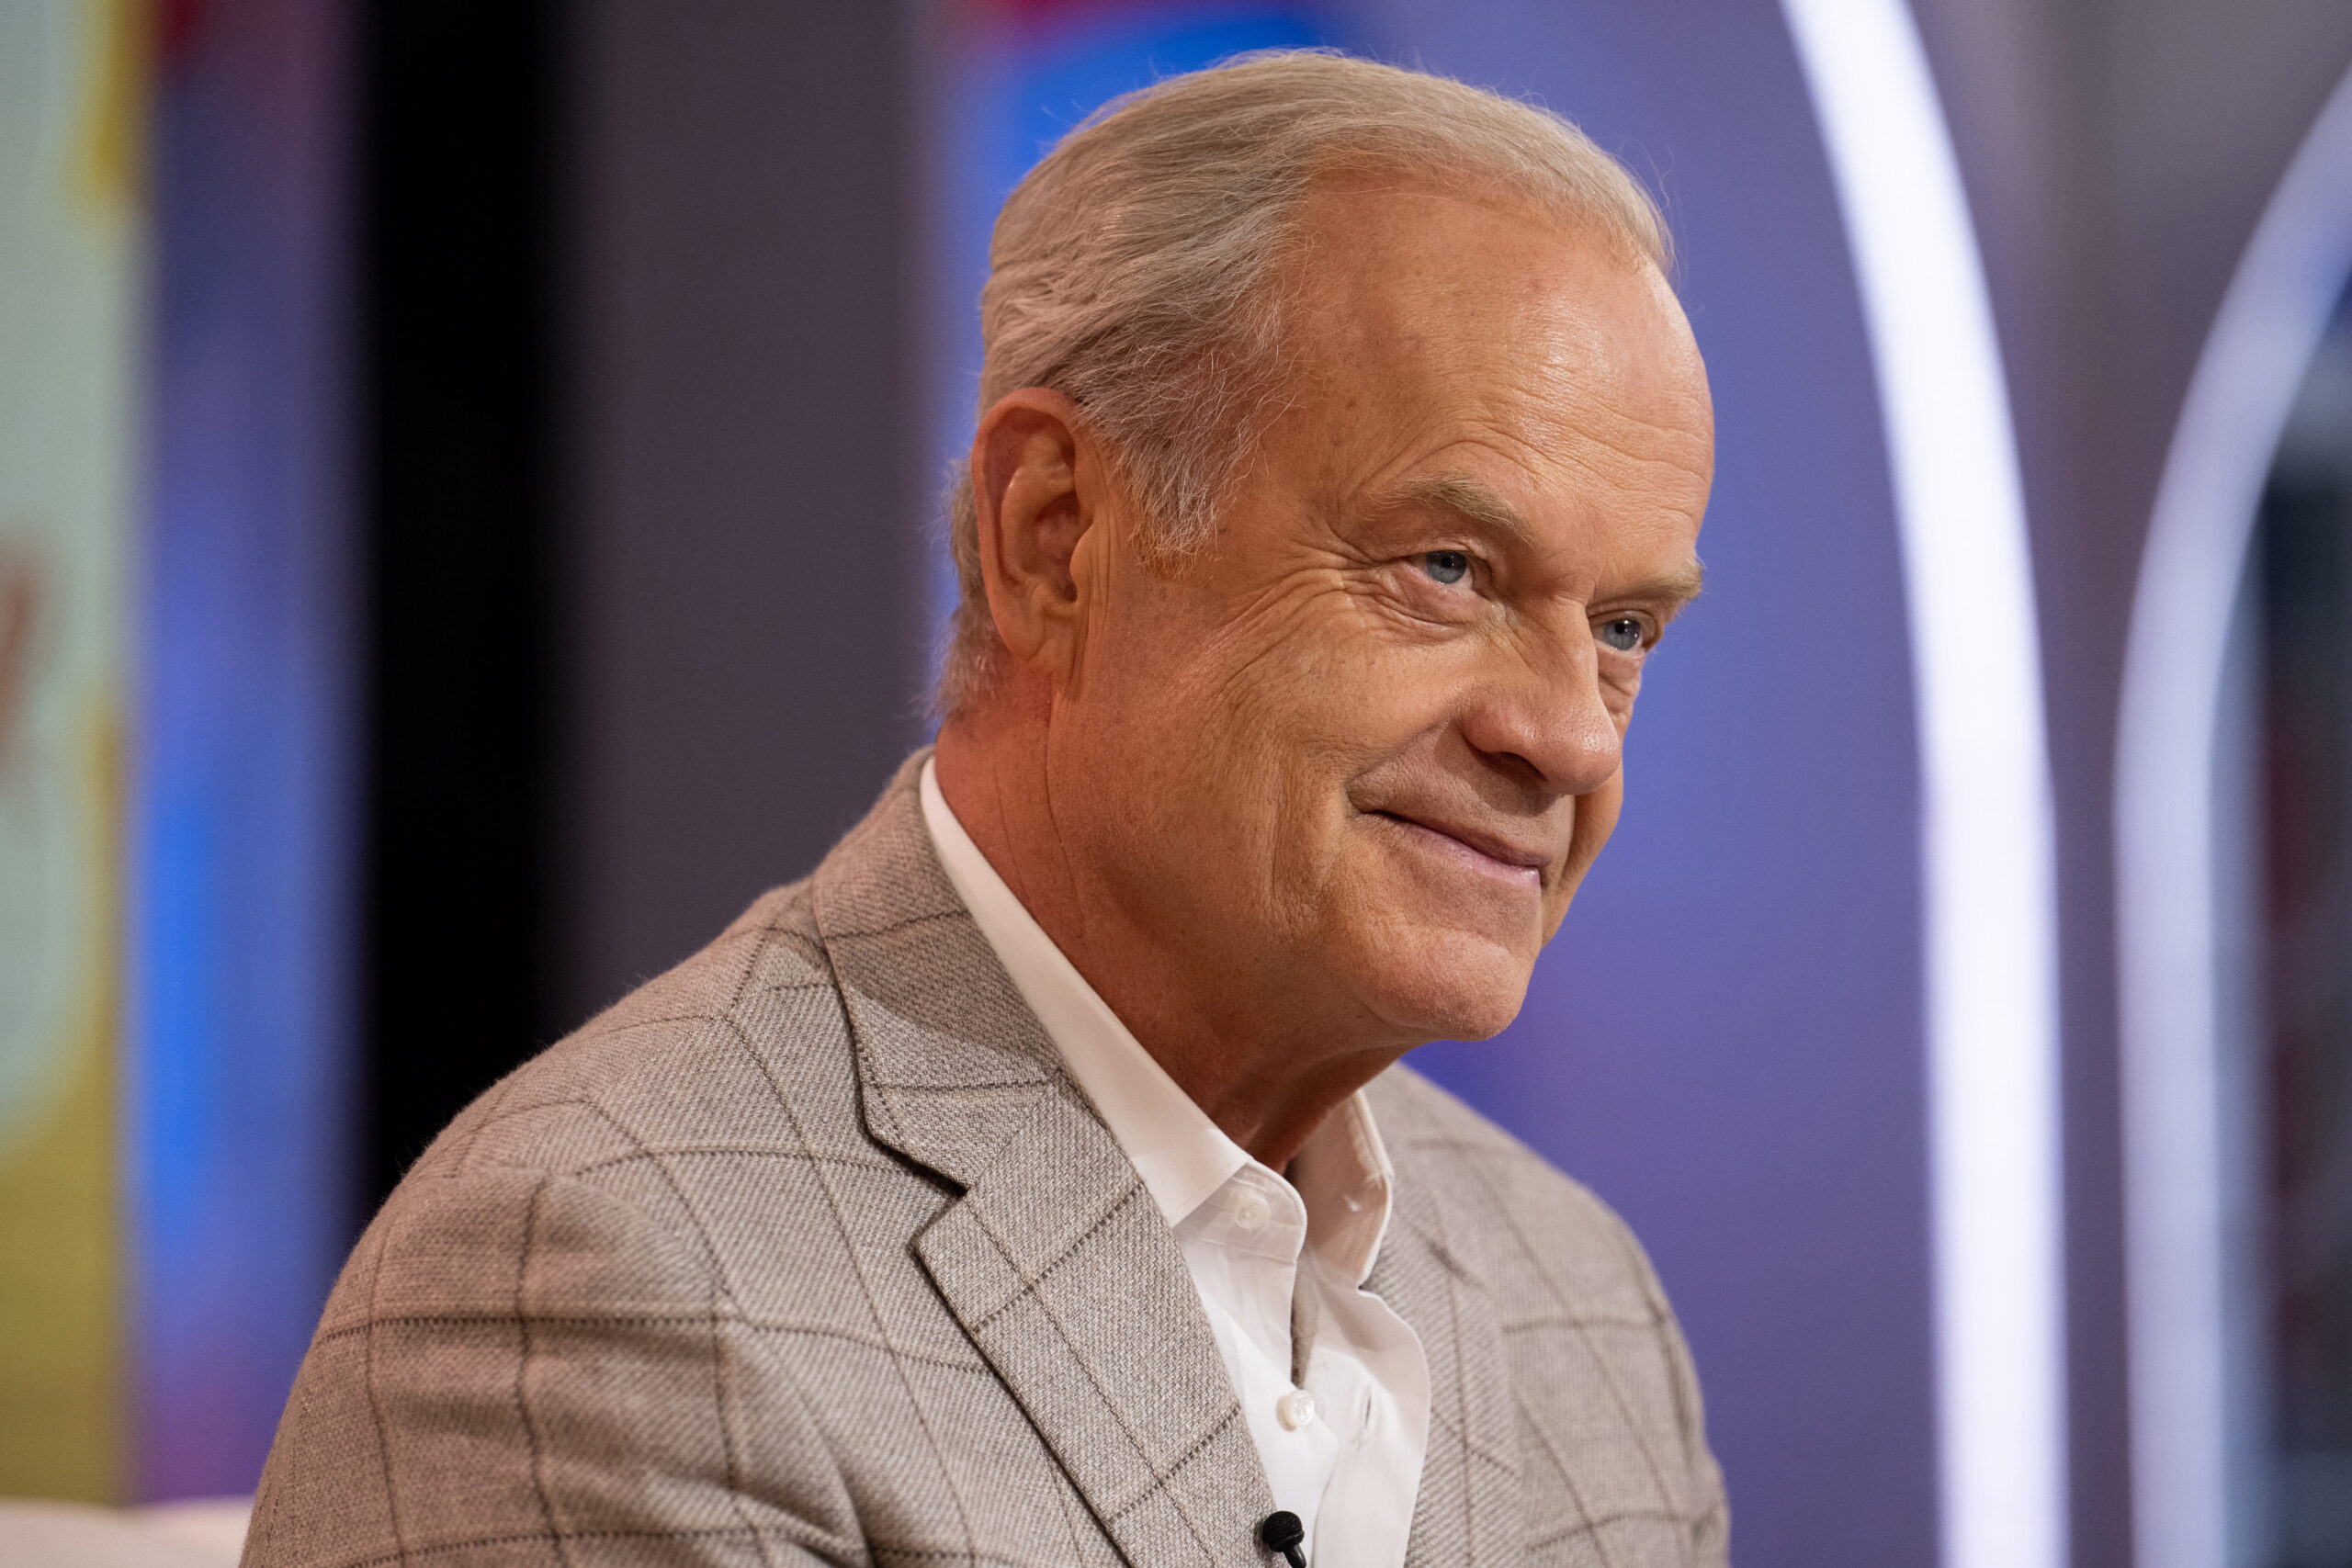 Kelsey Grammer is ‘Unapologetic’ About Faith As ‘Jesus Revolution’ Soars, Teases ‘Frasier’ Reboot